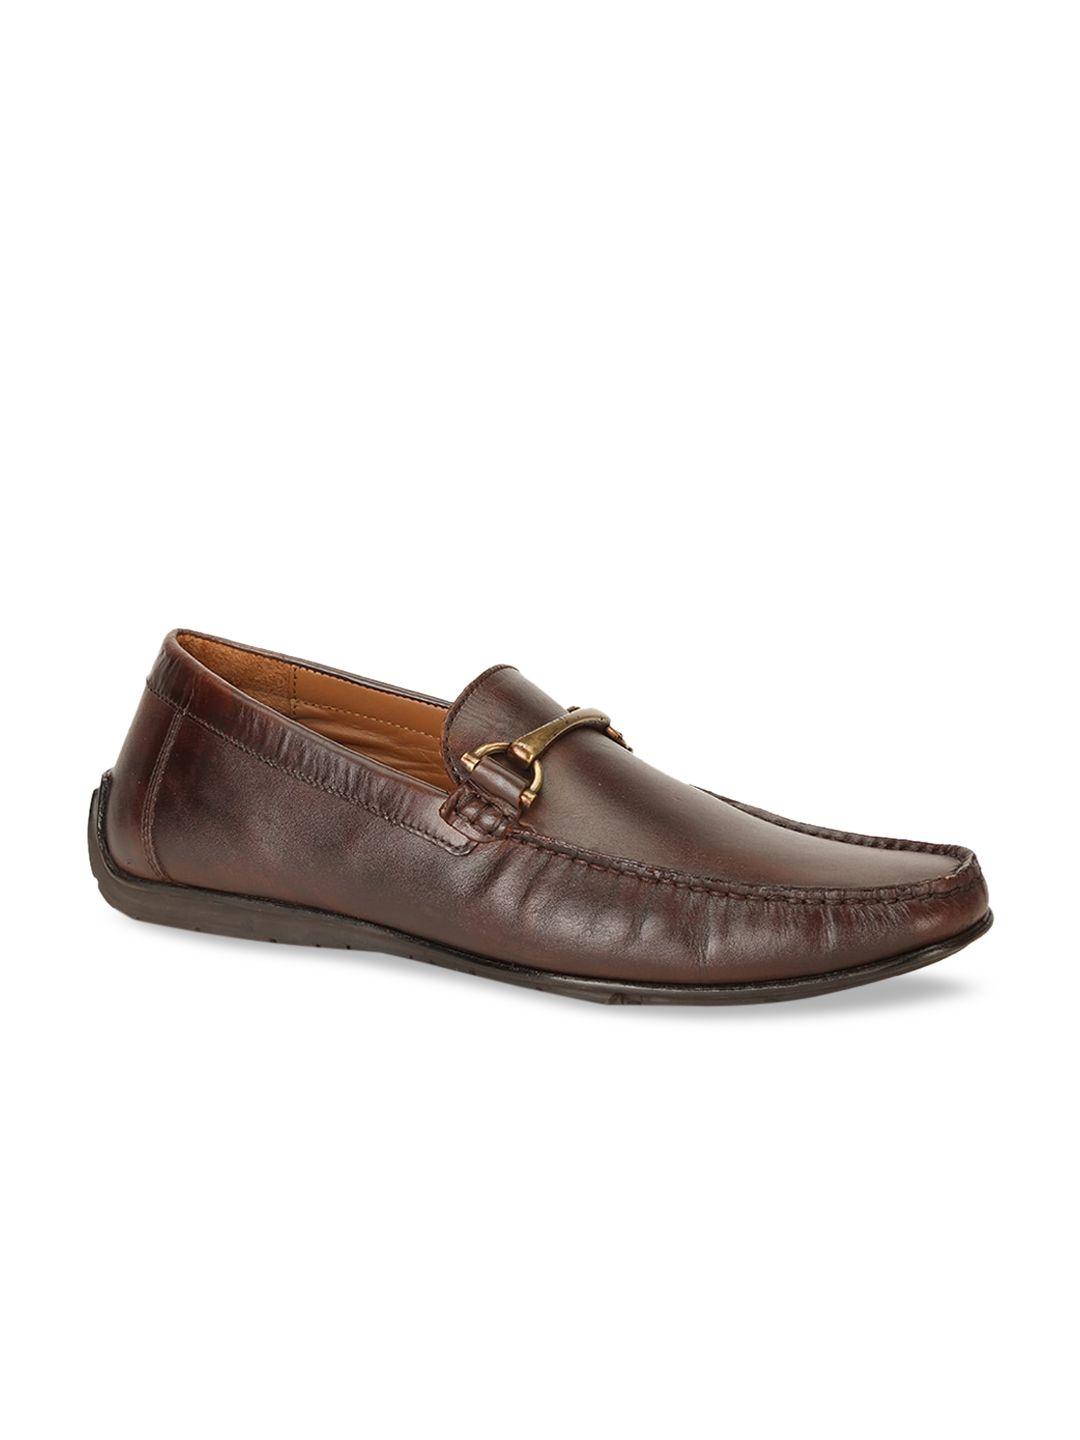 hush-puppies-men-brown-leather-loafers